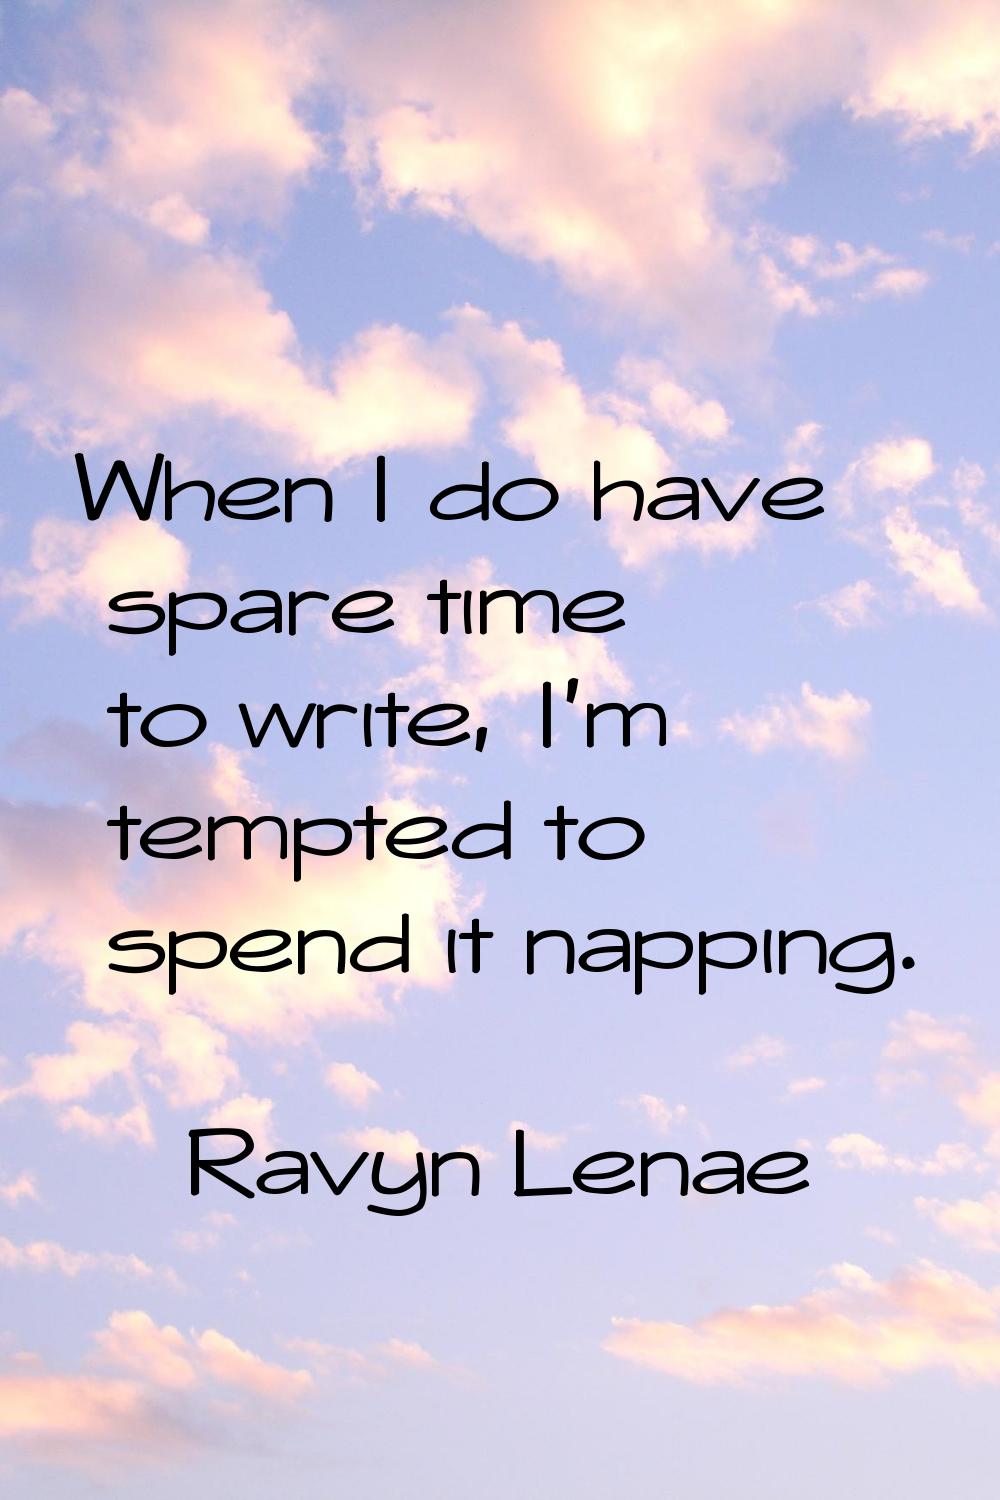 When I do have spare time to write, I'm tempted to spend it napping.